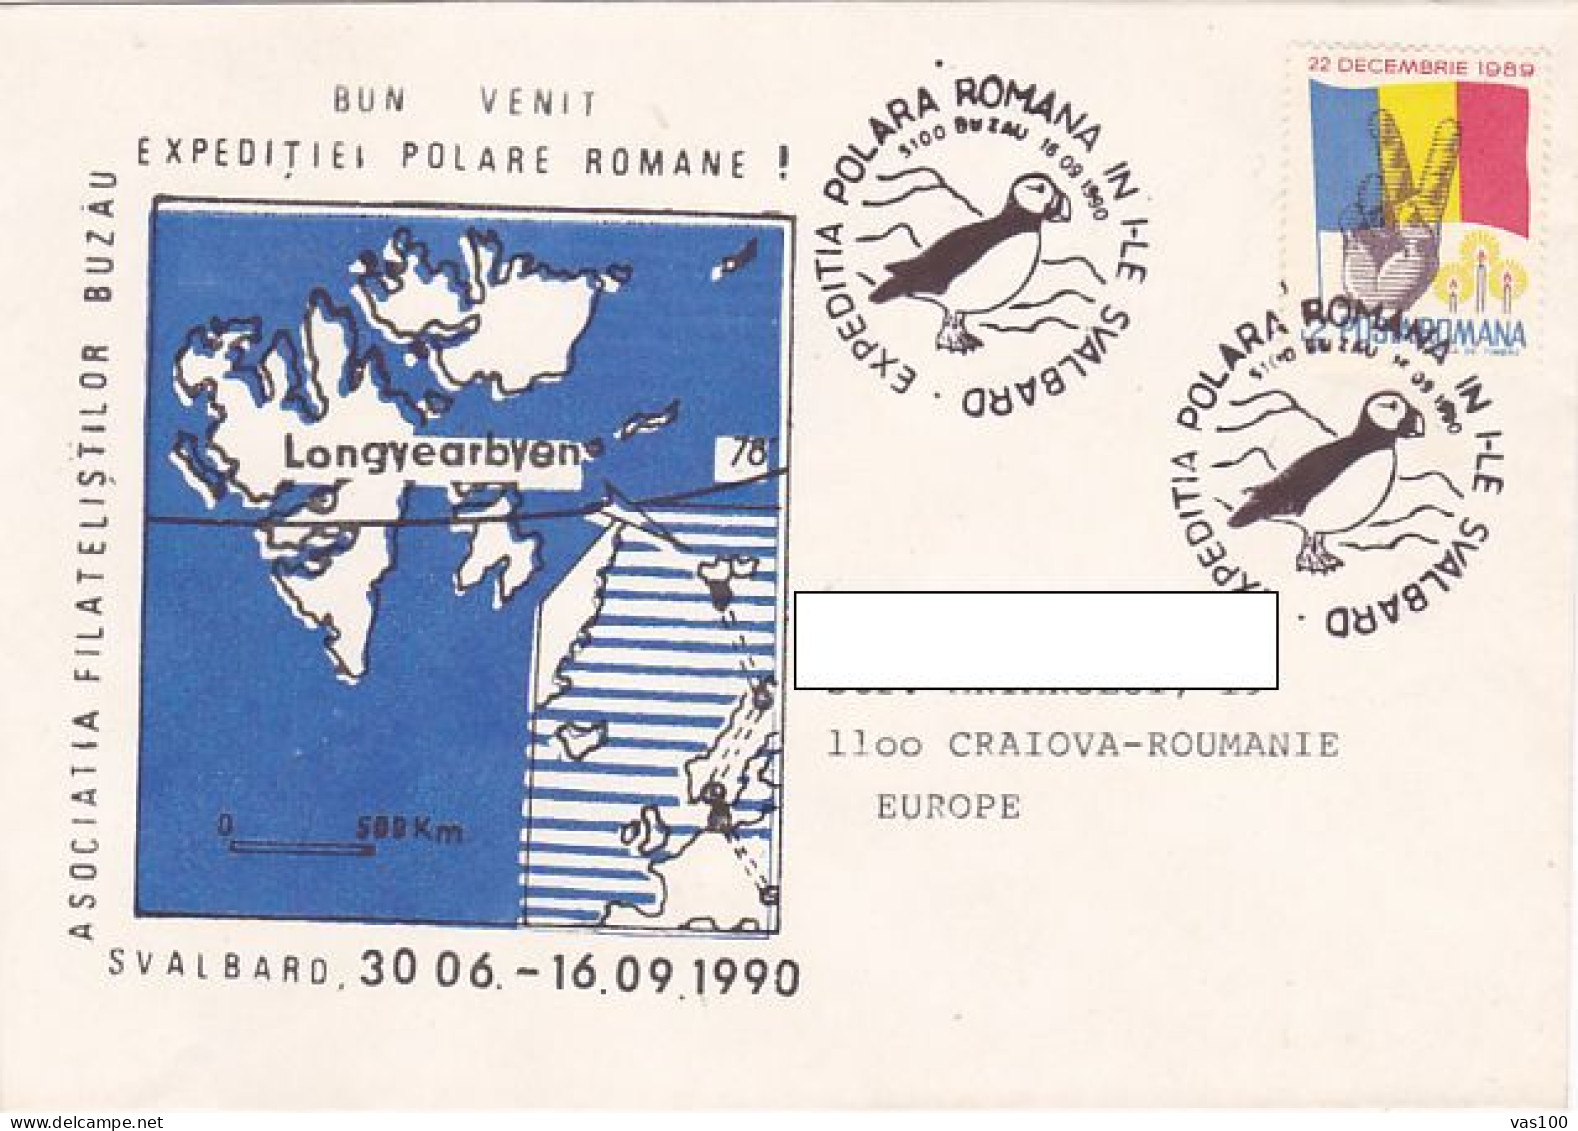 NORTH POLE, ARCTIC EXPEDITION, ROMANIAN EXPEDITION IN SVALBARD, PUFFIN, SPECIAL COVER, 1990, ROMANIA - Arctische Expedities